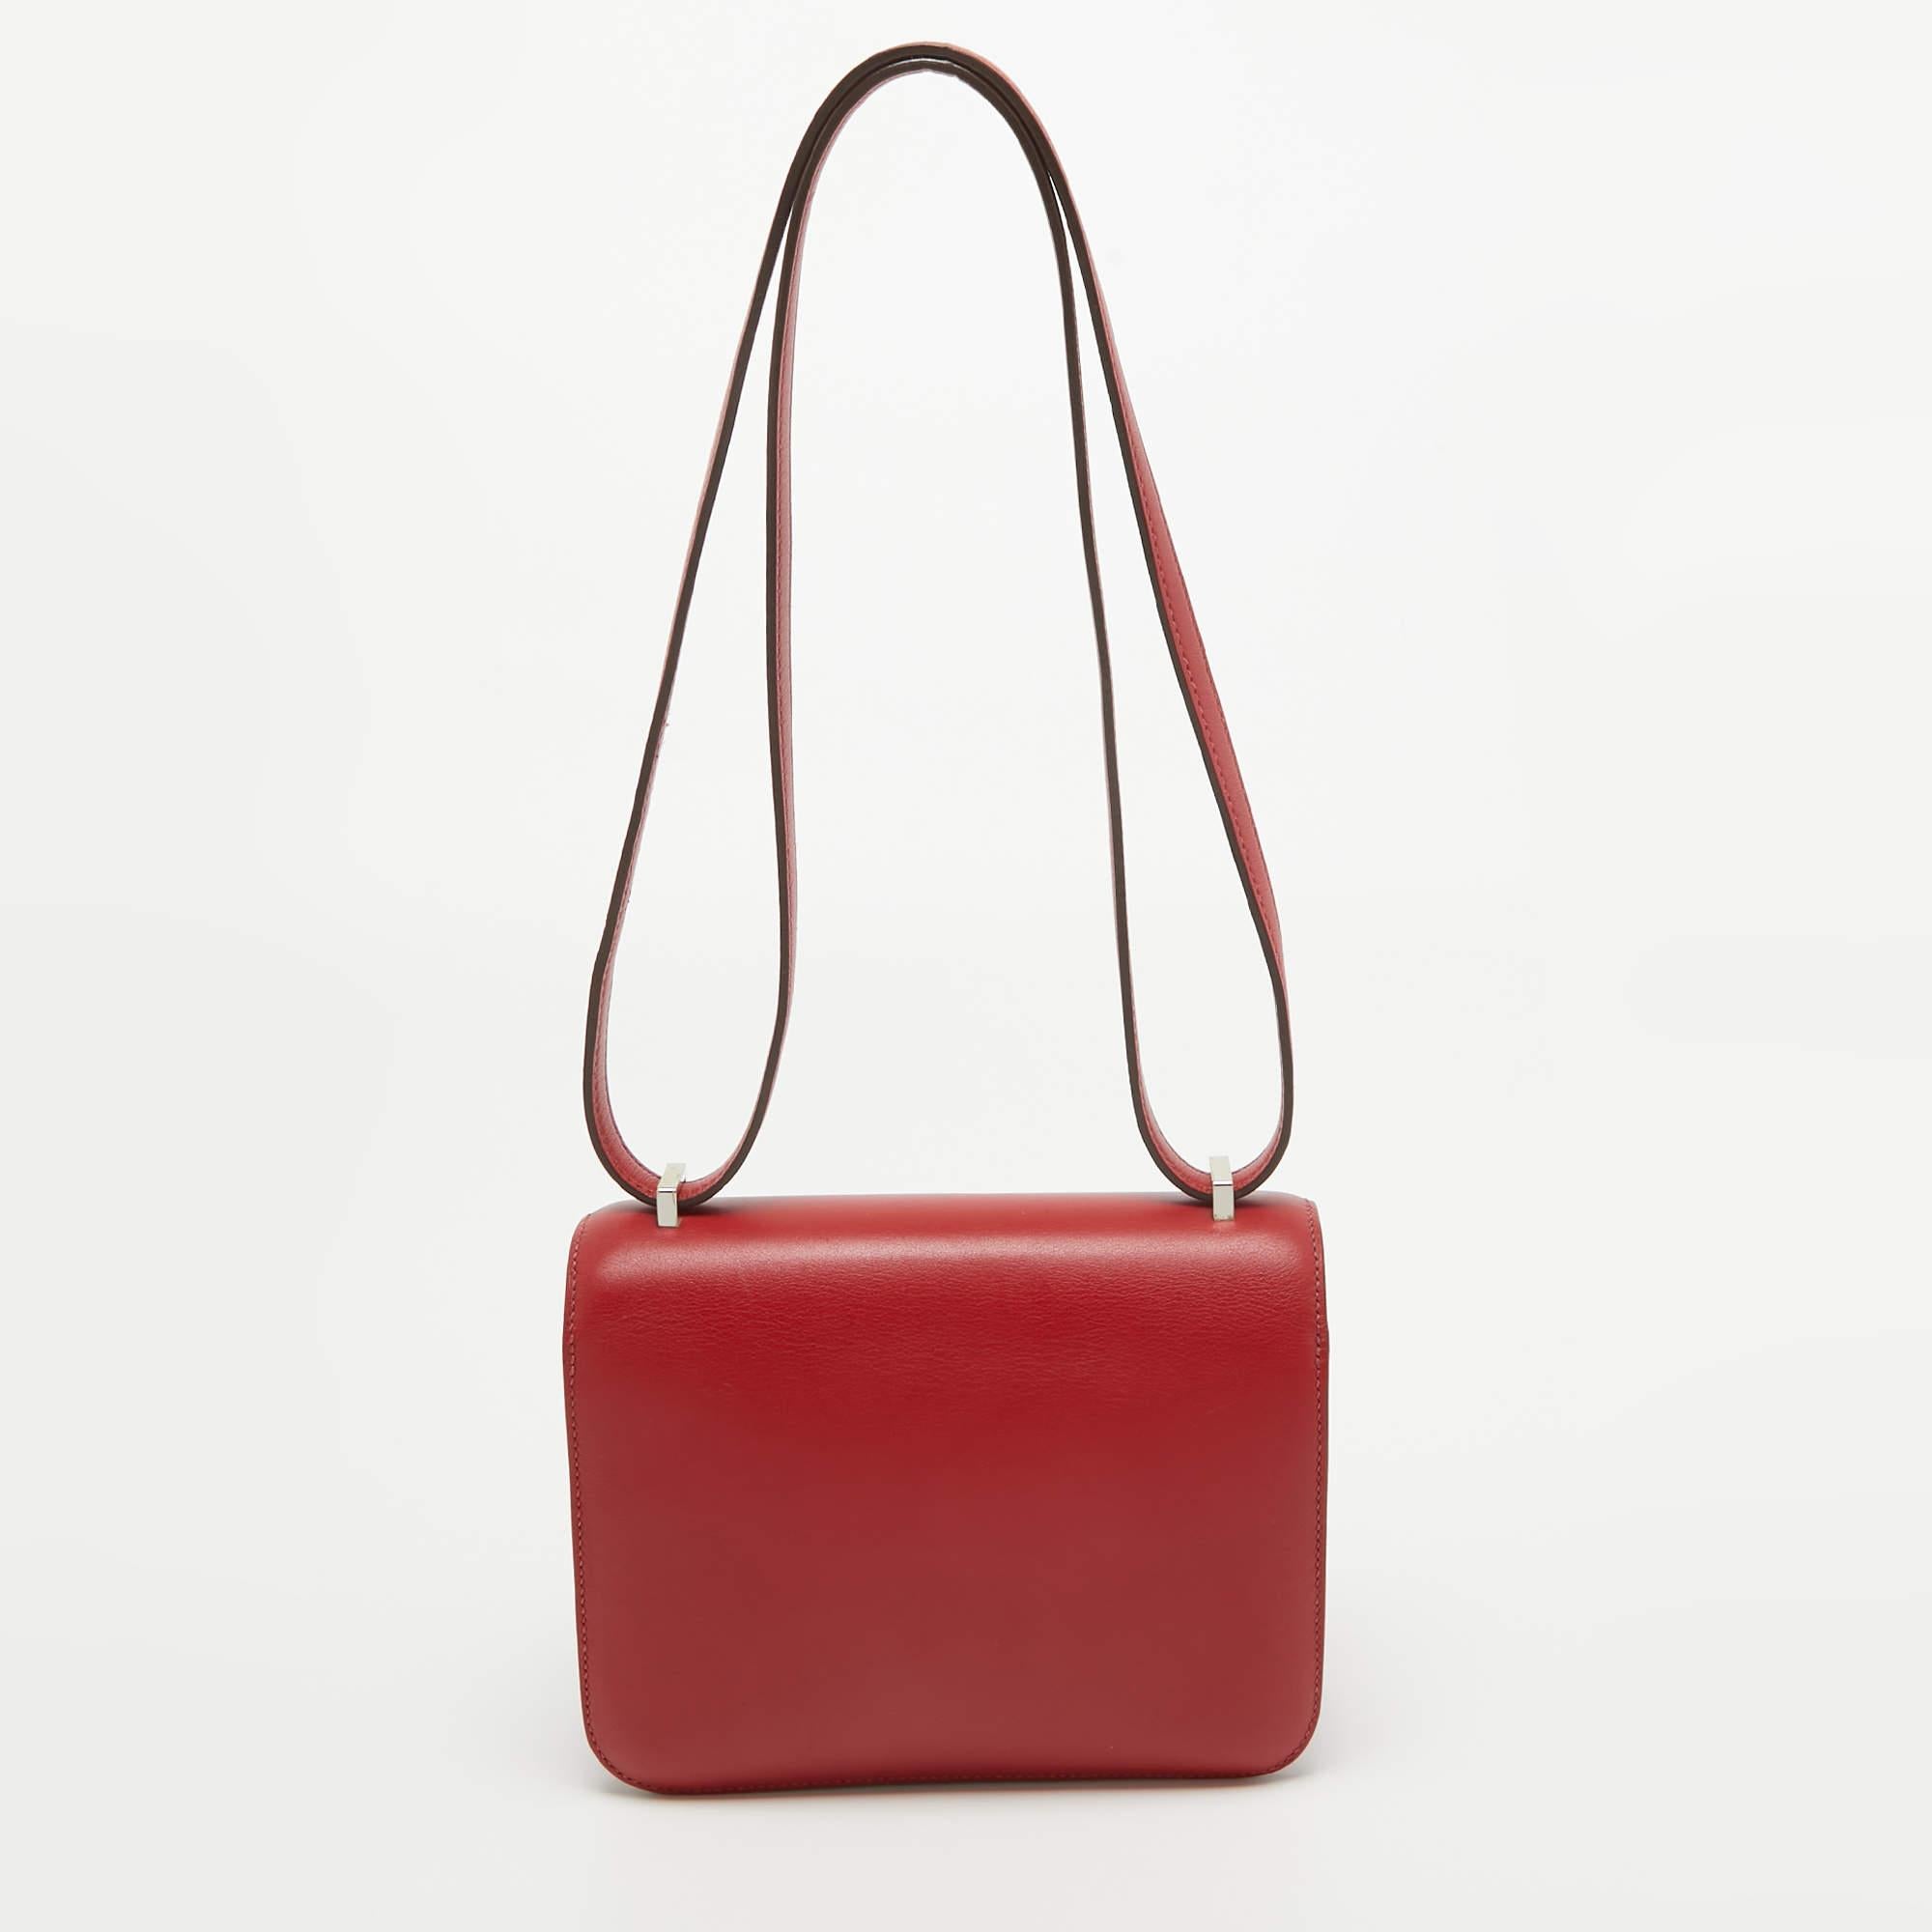 This Hermes Rouge Casaque Constance 18 Mini is crafted using Swift leather and features the iconic H clasp on the front flap. The shoulder strap lets you carry it gracefully, and the fine finish of the sturdy silhouette projects a luxe look. Get